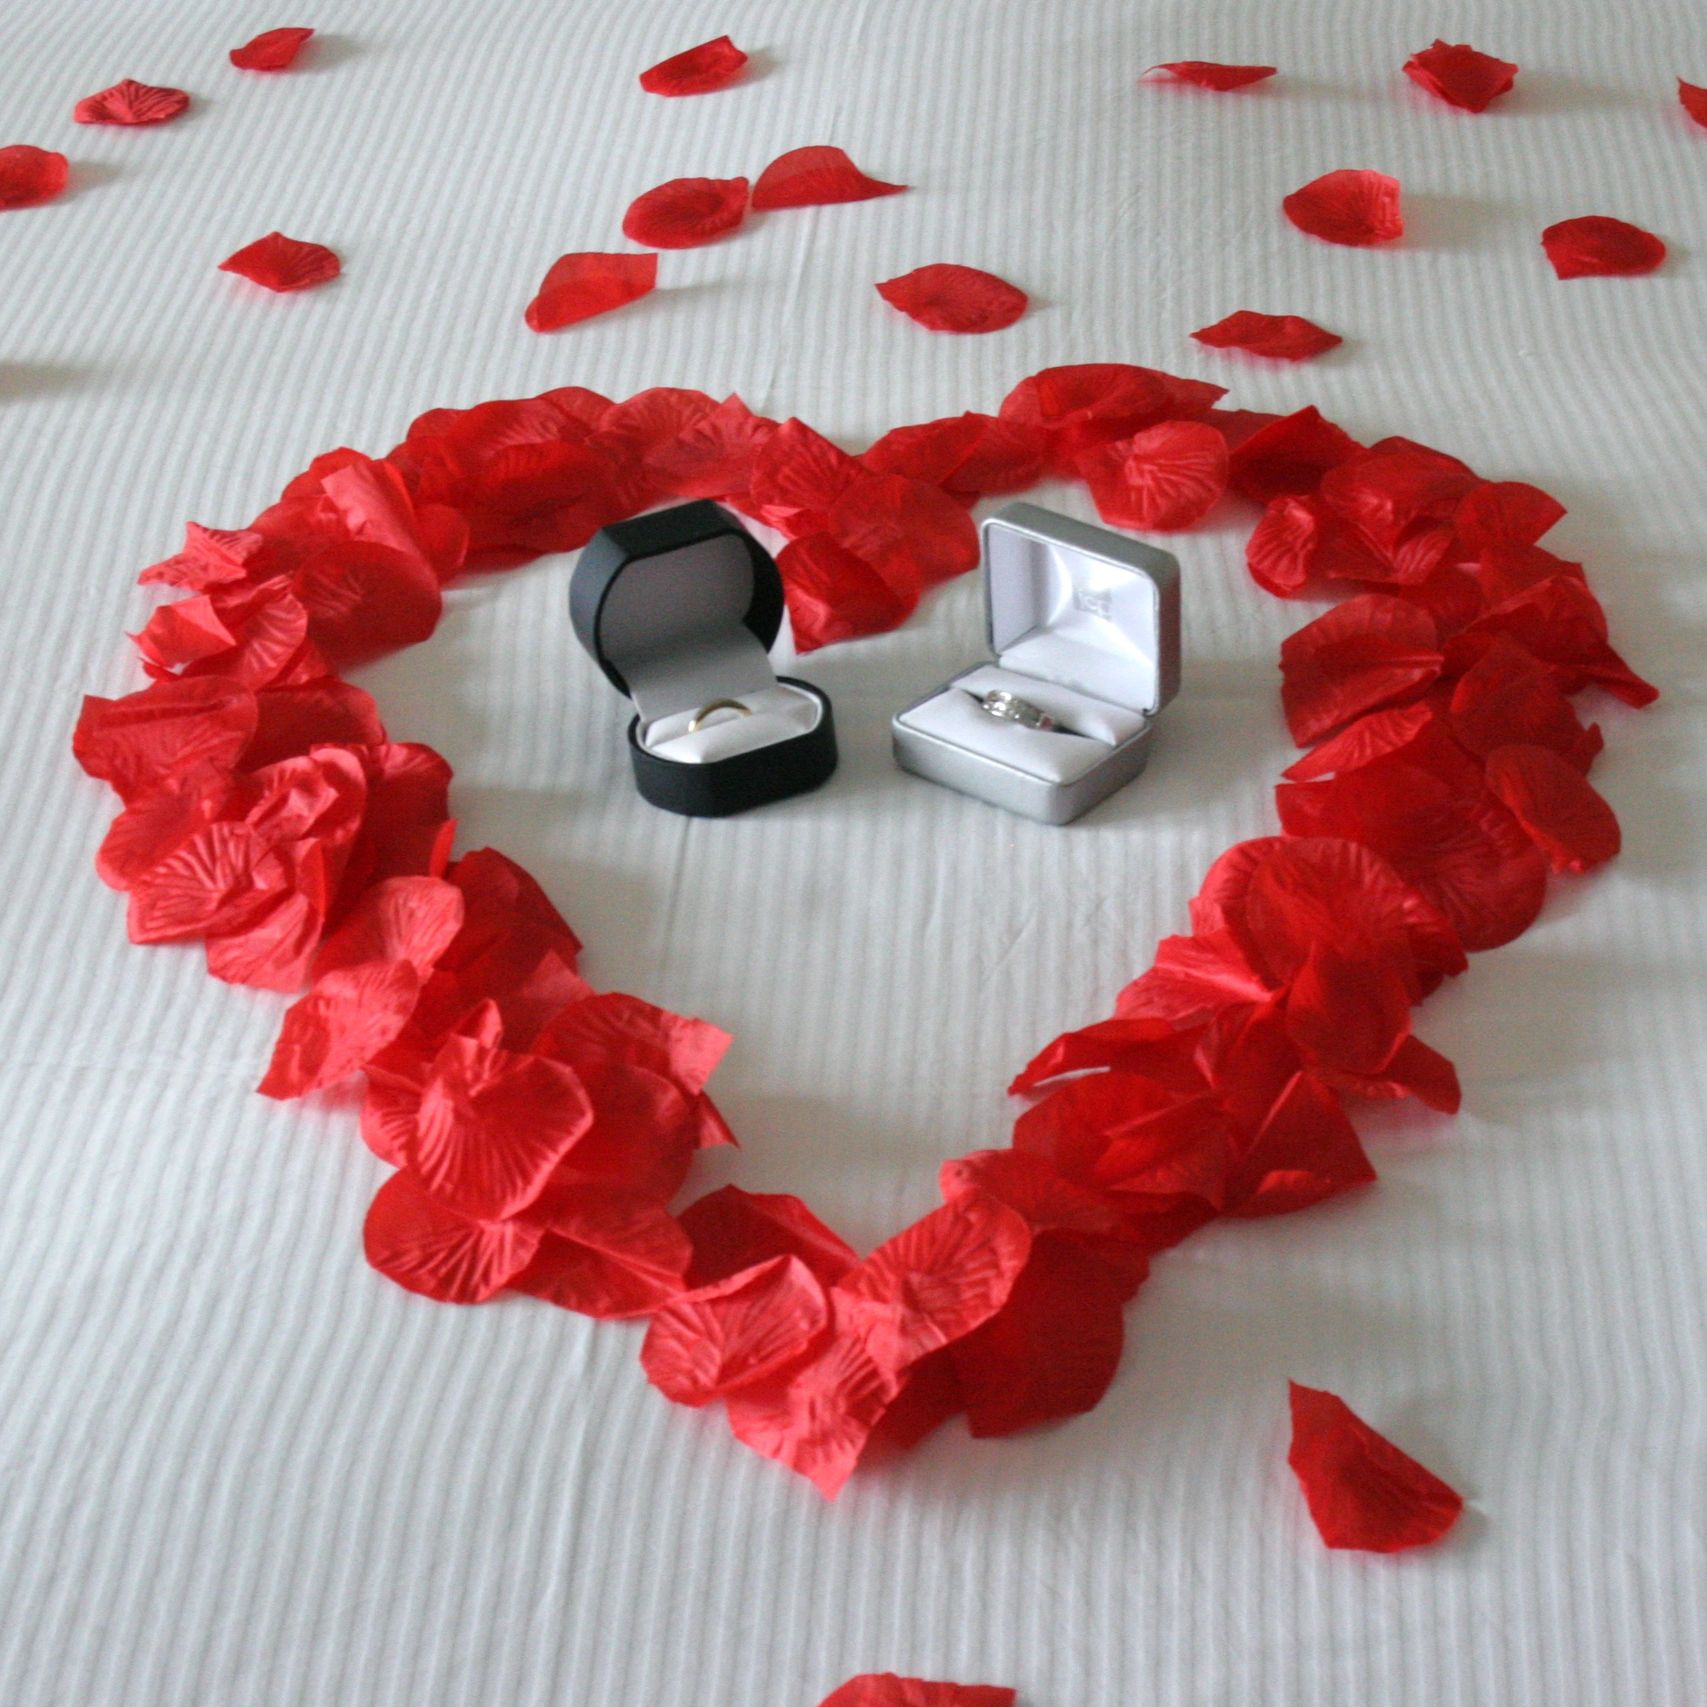 Wedding ring and band inside a heart of rose petals